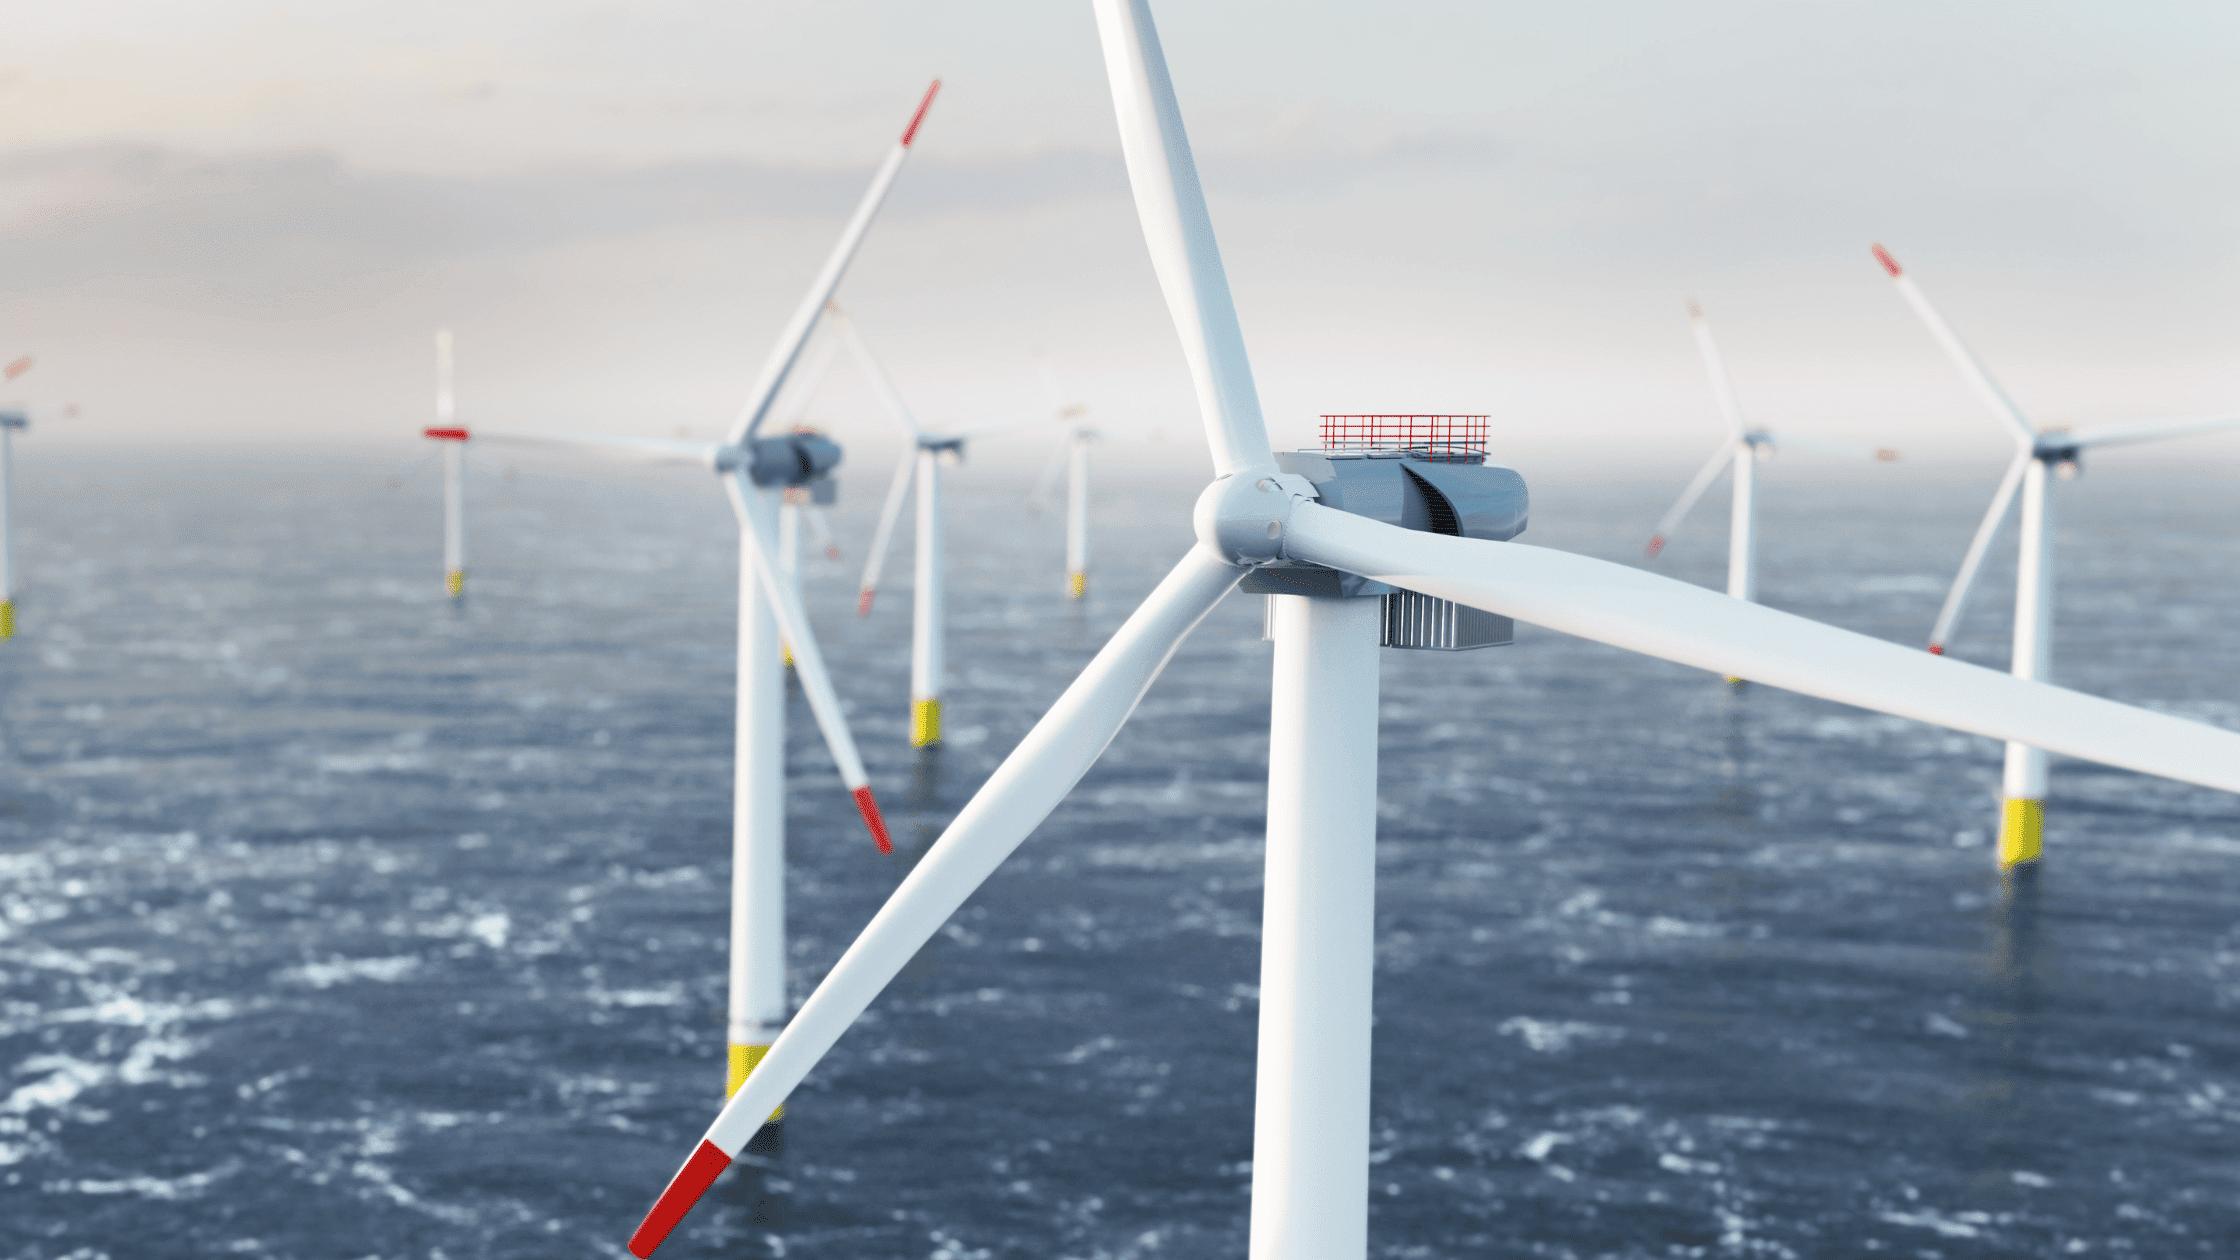 NJ's Offshore Wind Odyssey Gets a $10.6M Boost